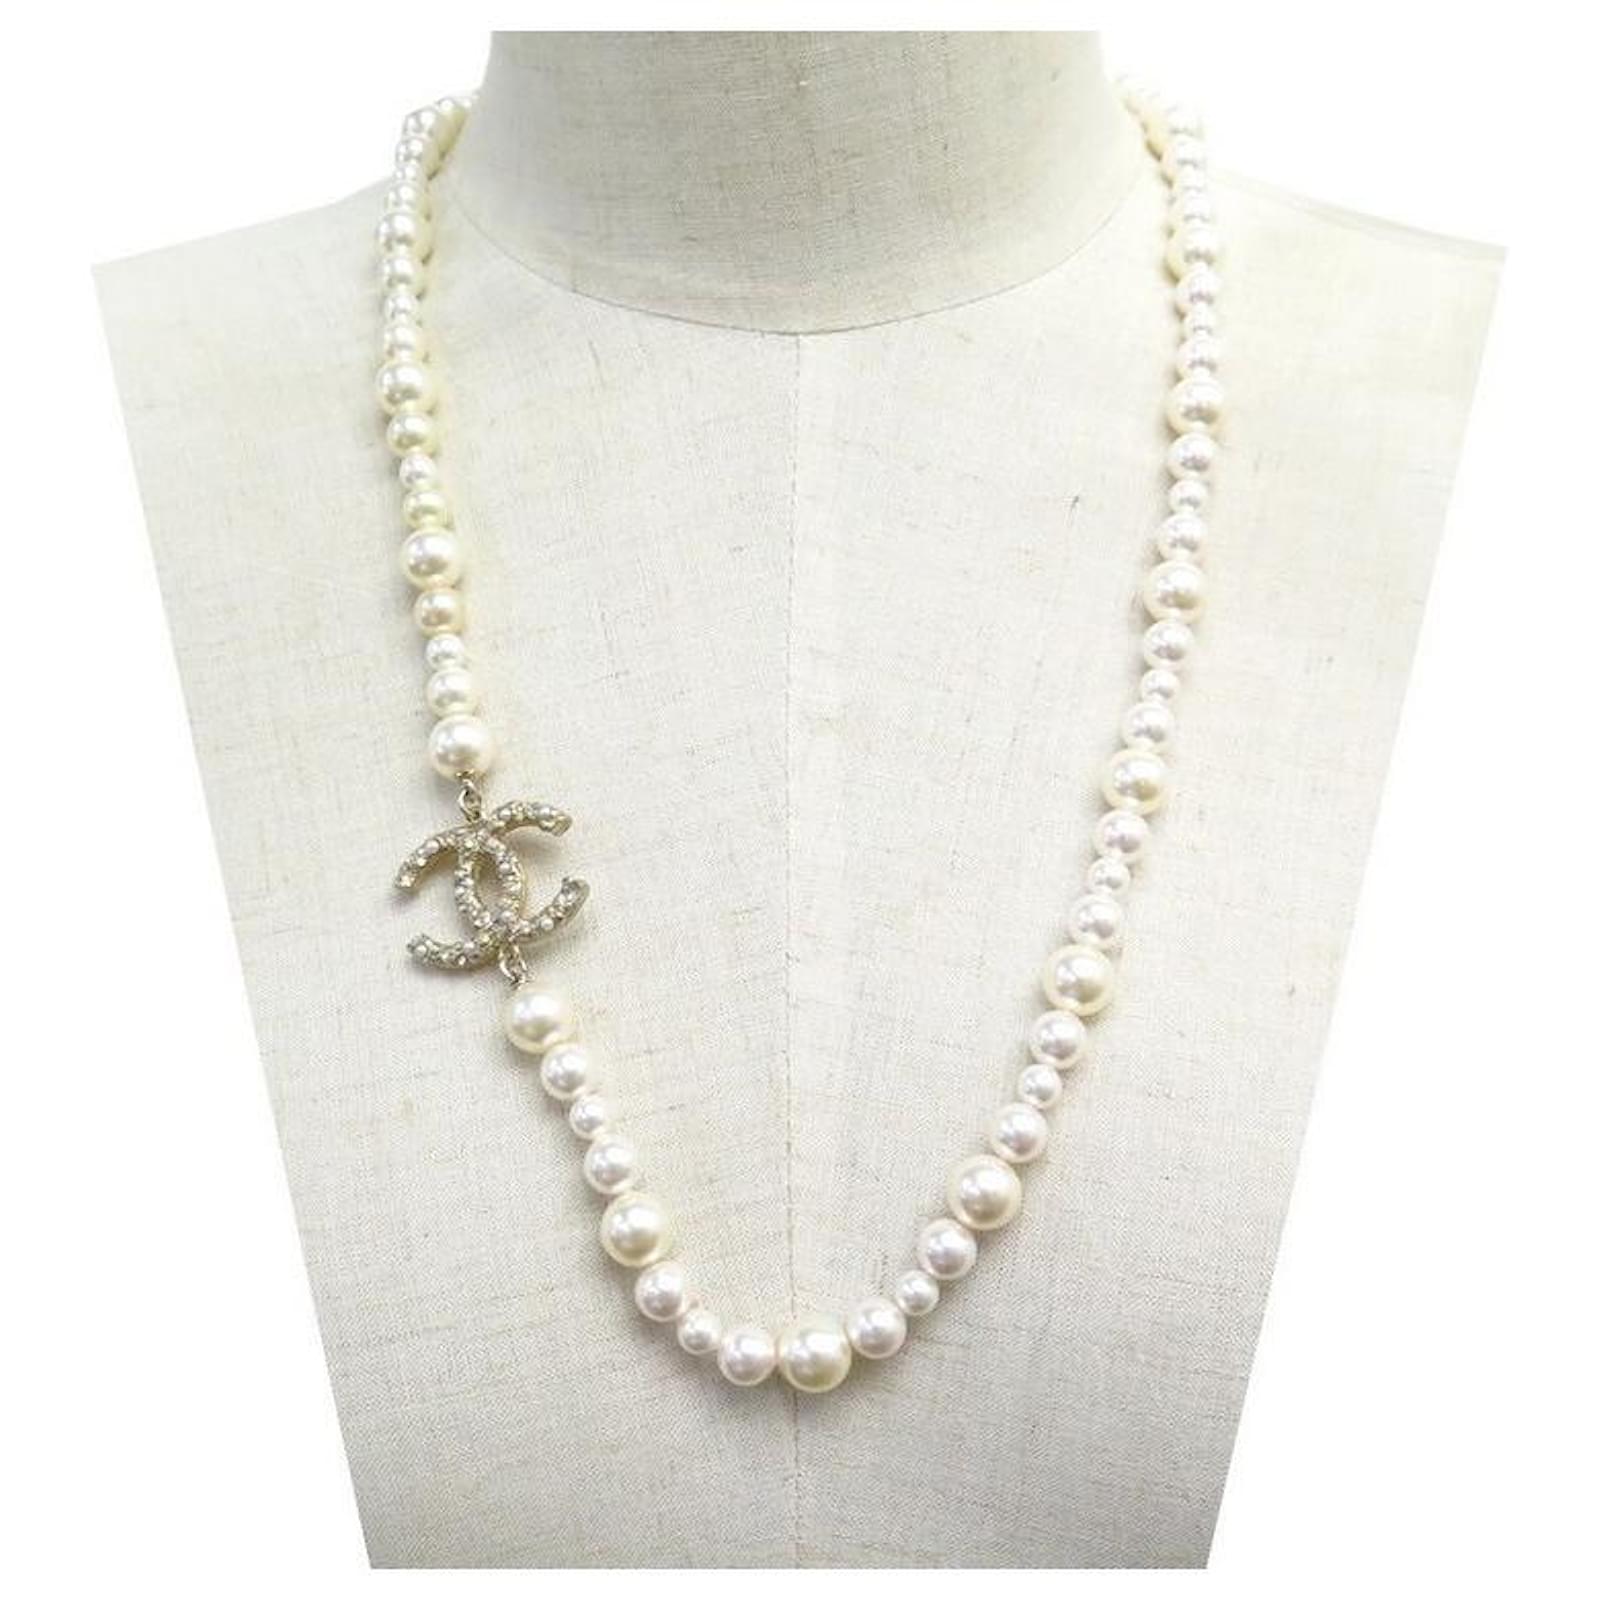 NEW CHANEL NECKLACE LOGO CC & PEARLS NECKLACE 70 CM IN GOLD METAL